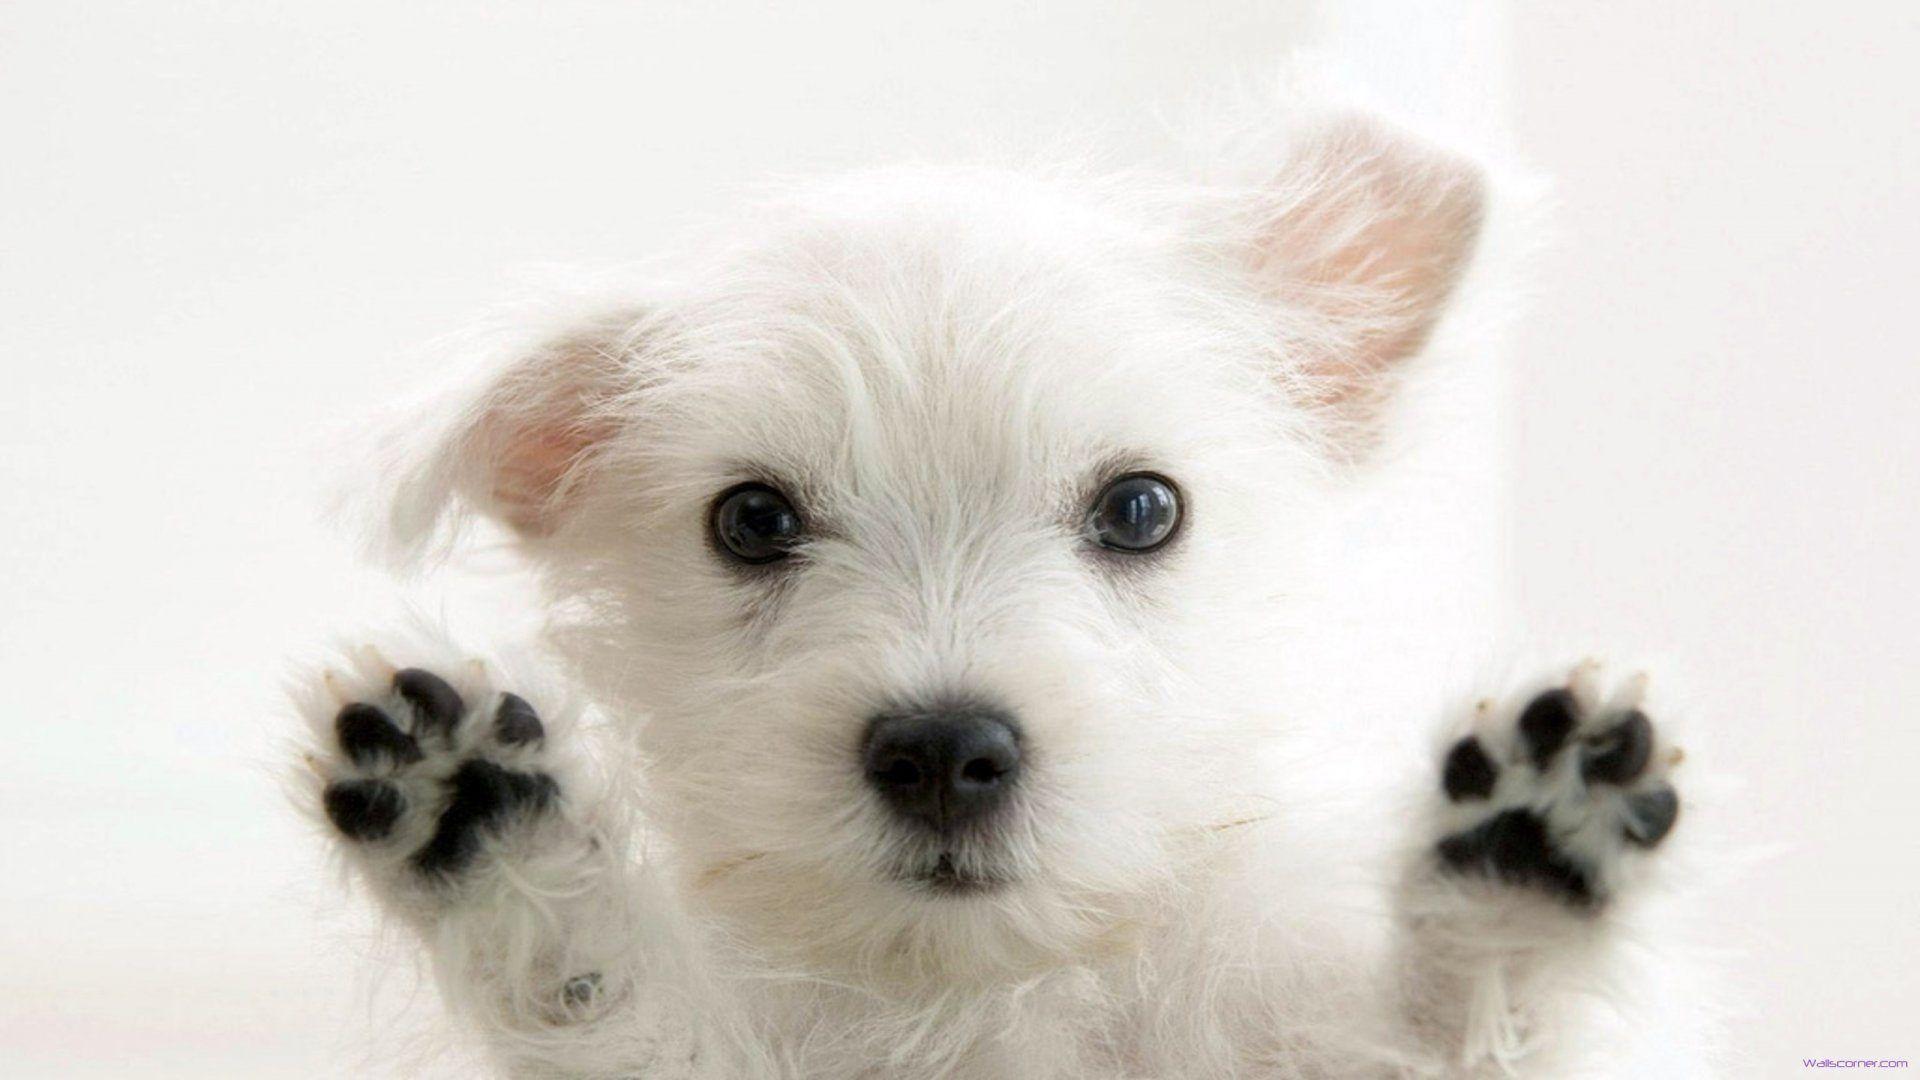 This Is A Really Cute Puppy 1920x1080 HD Wallpaper Cute